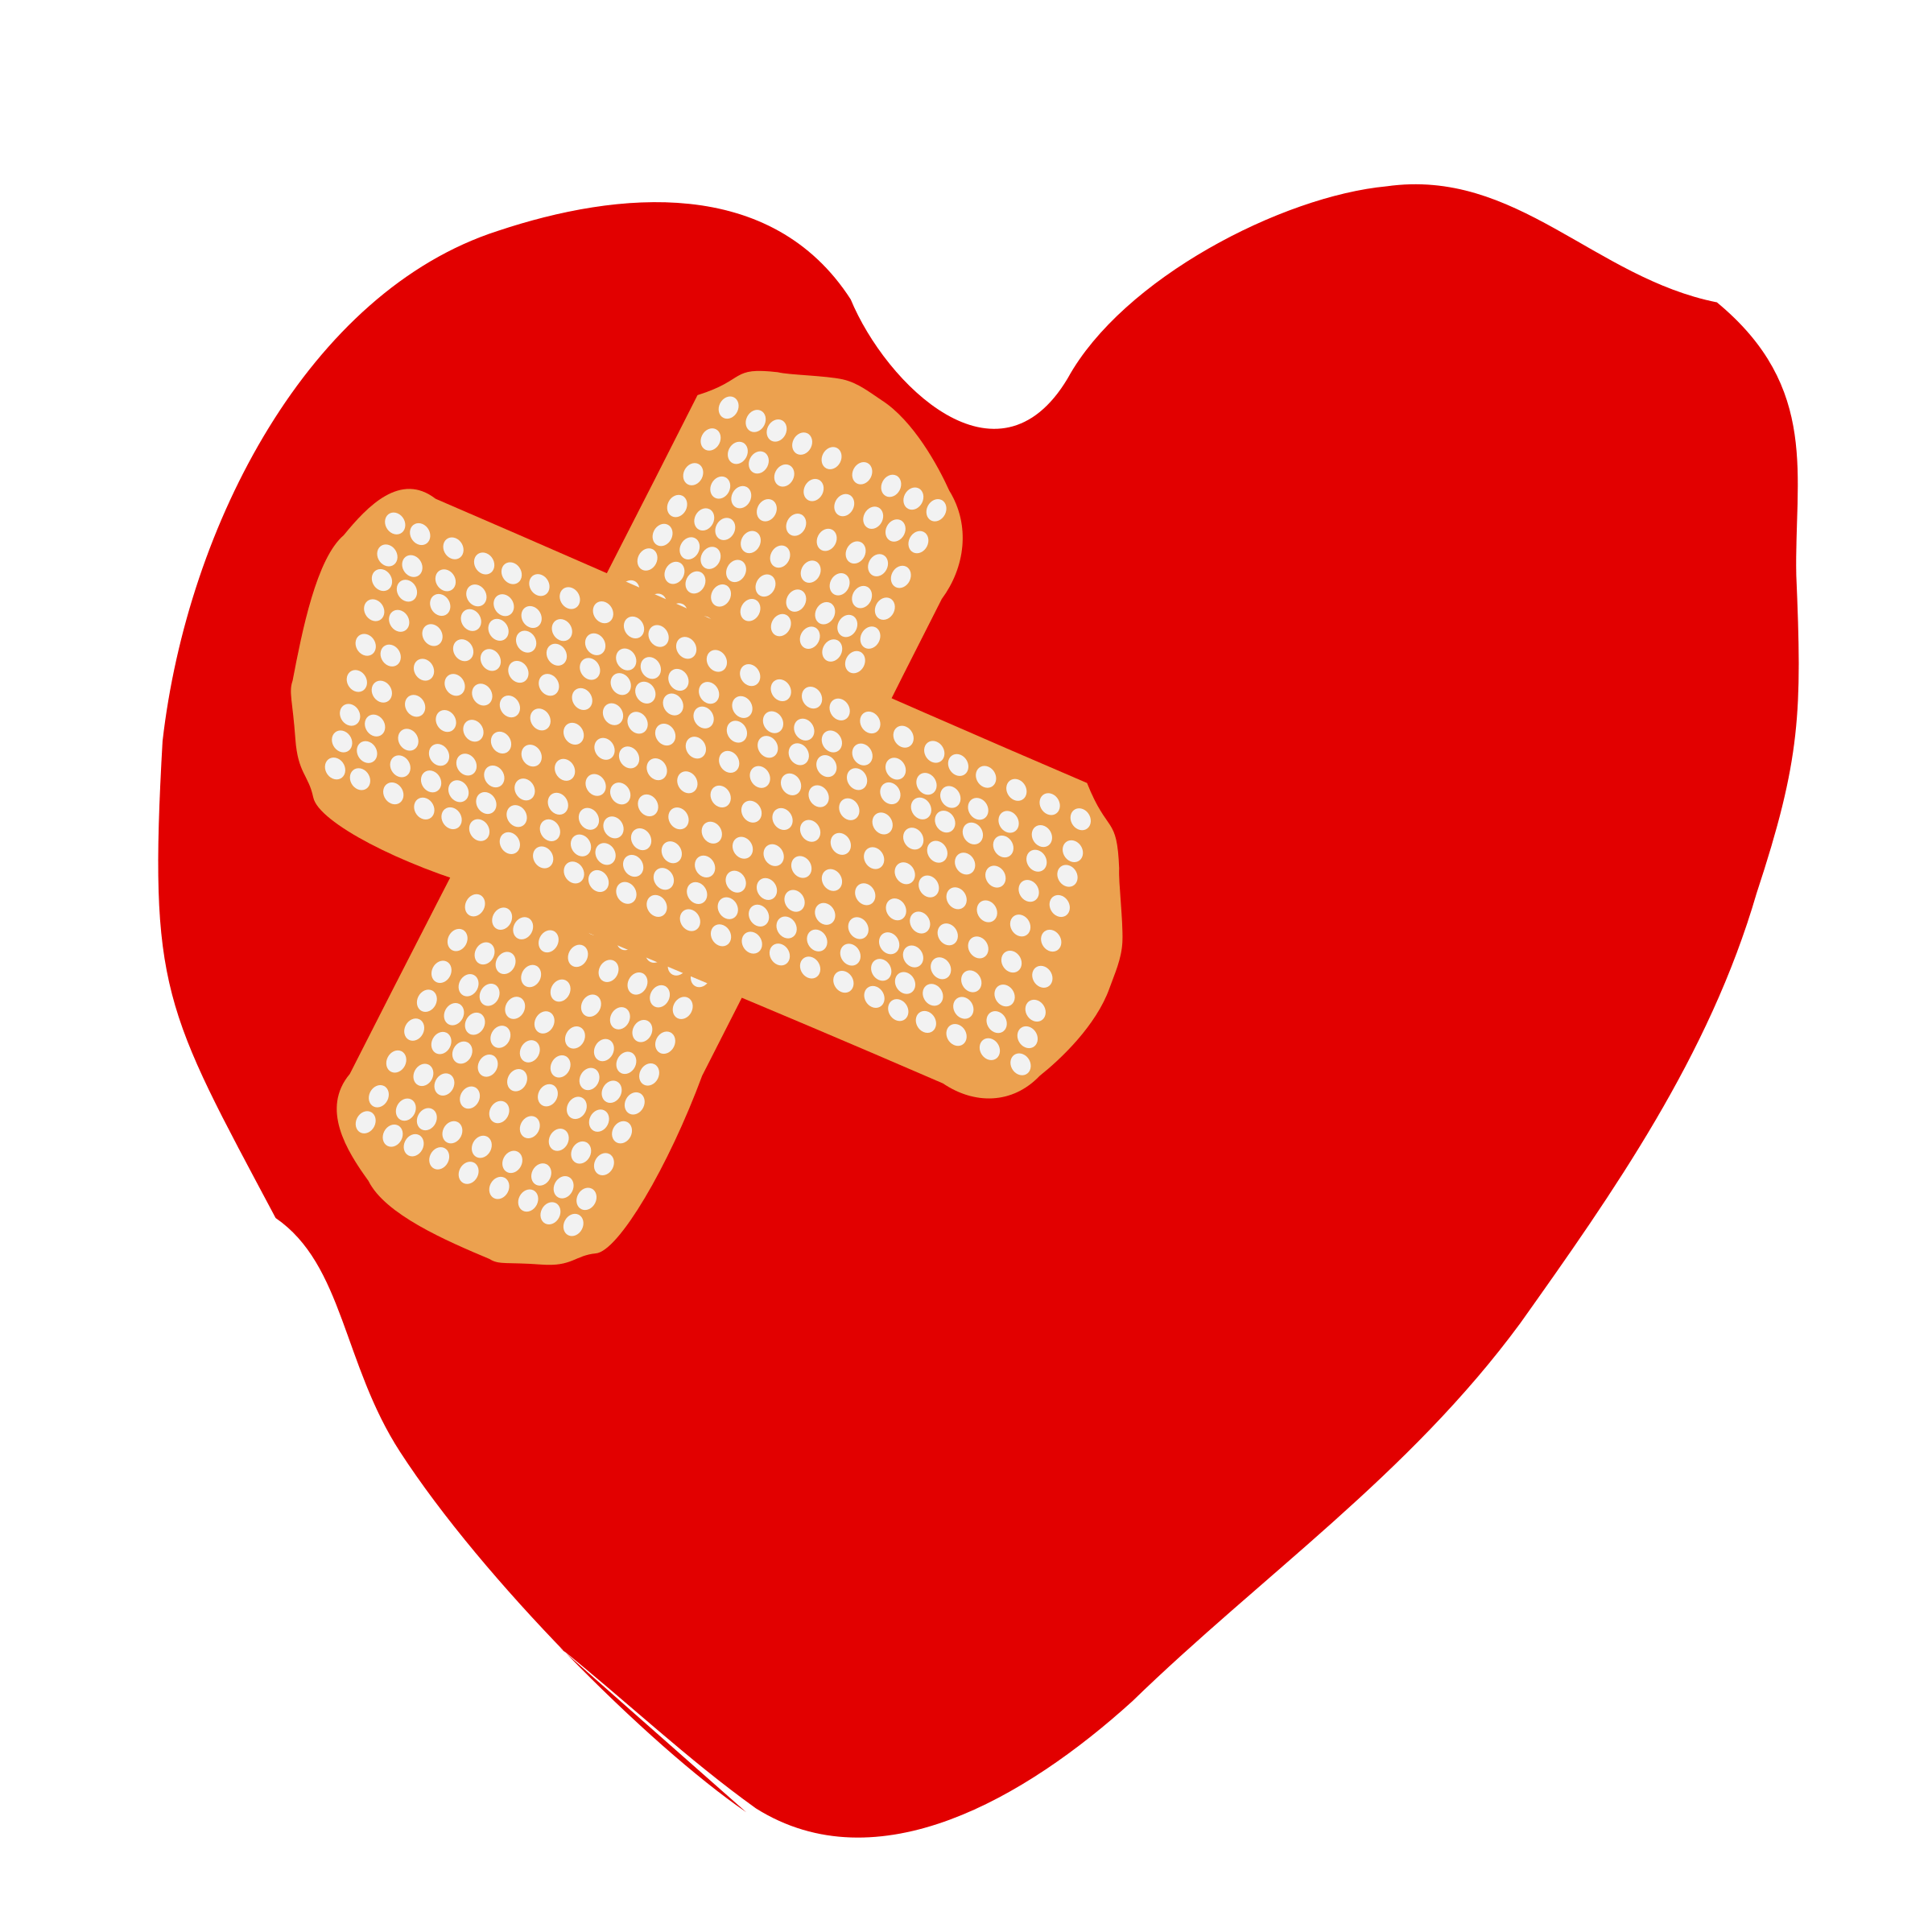 Returning to exercise and. Heartbeat clipart softball